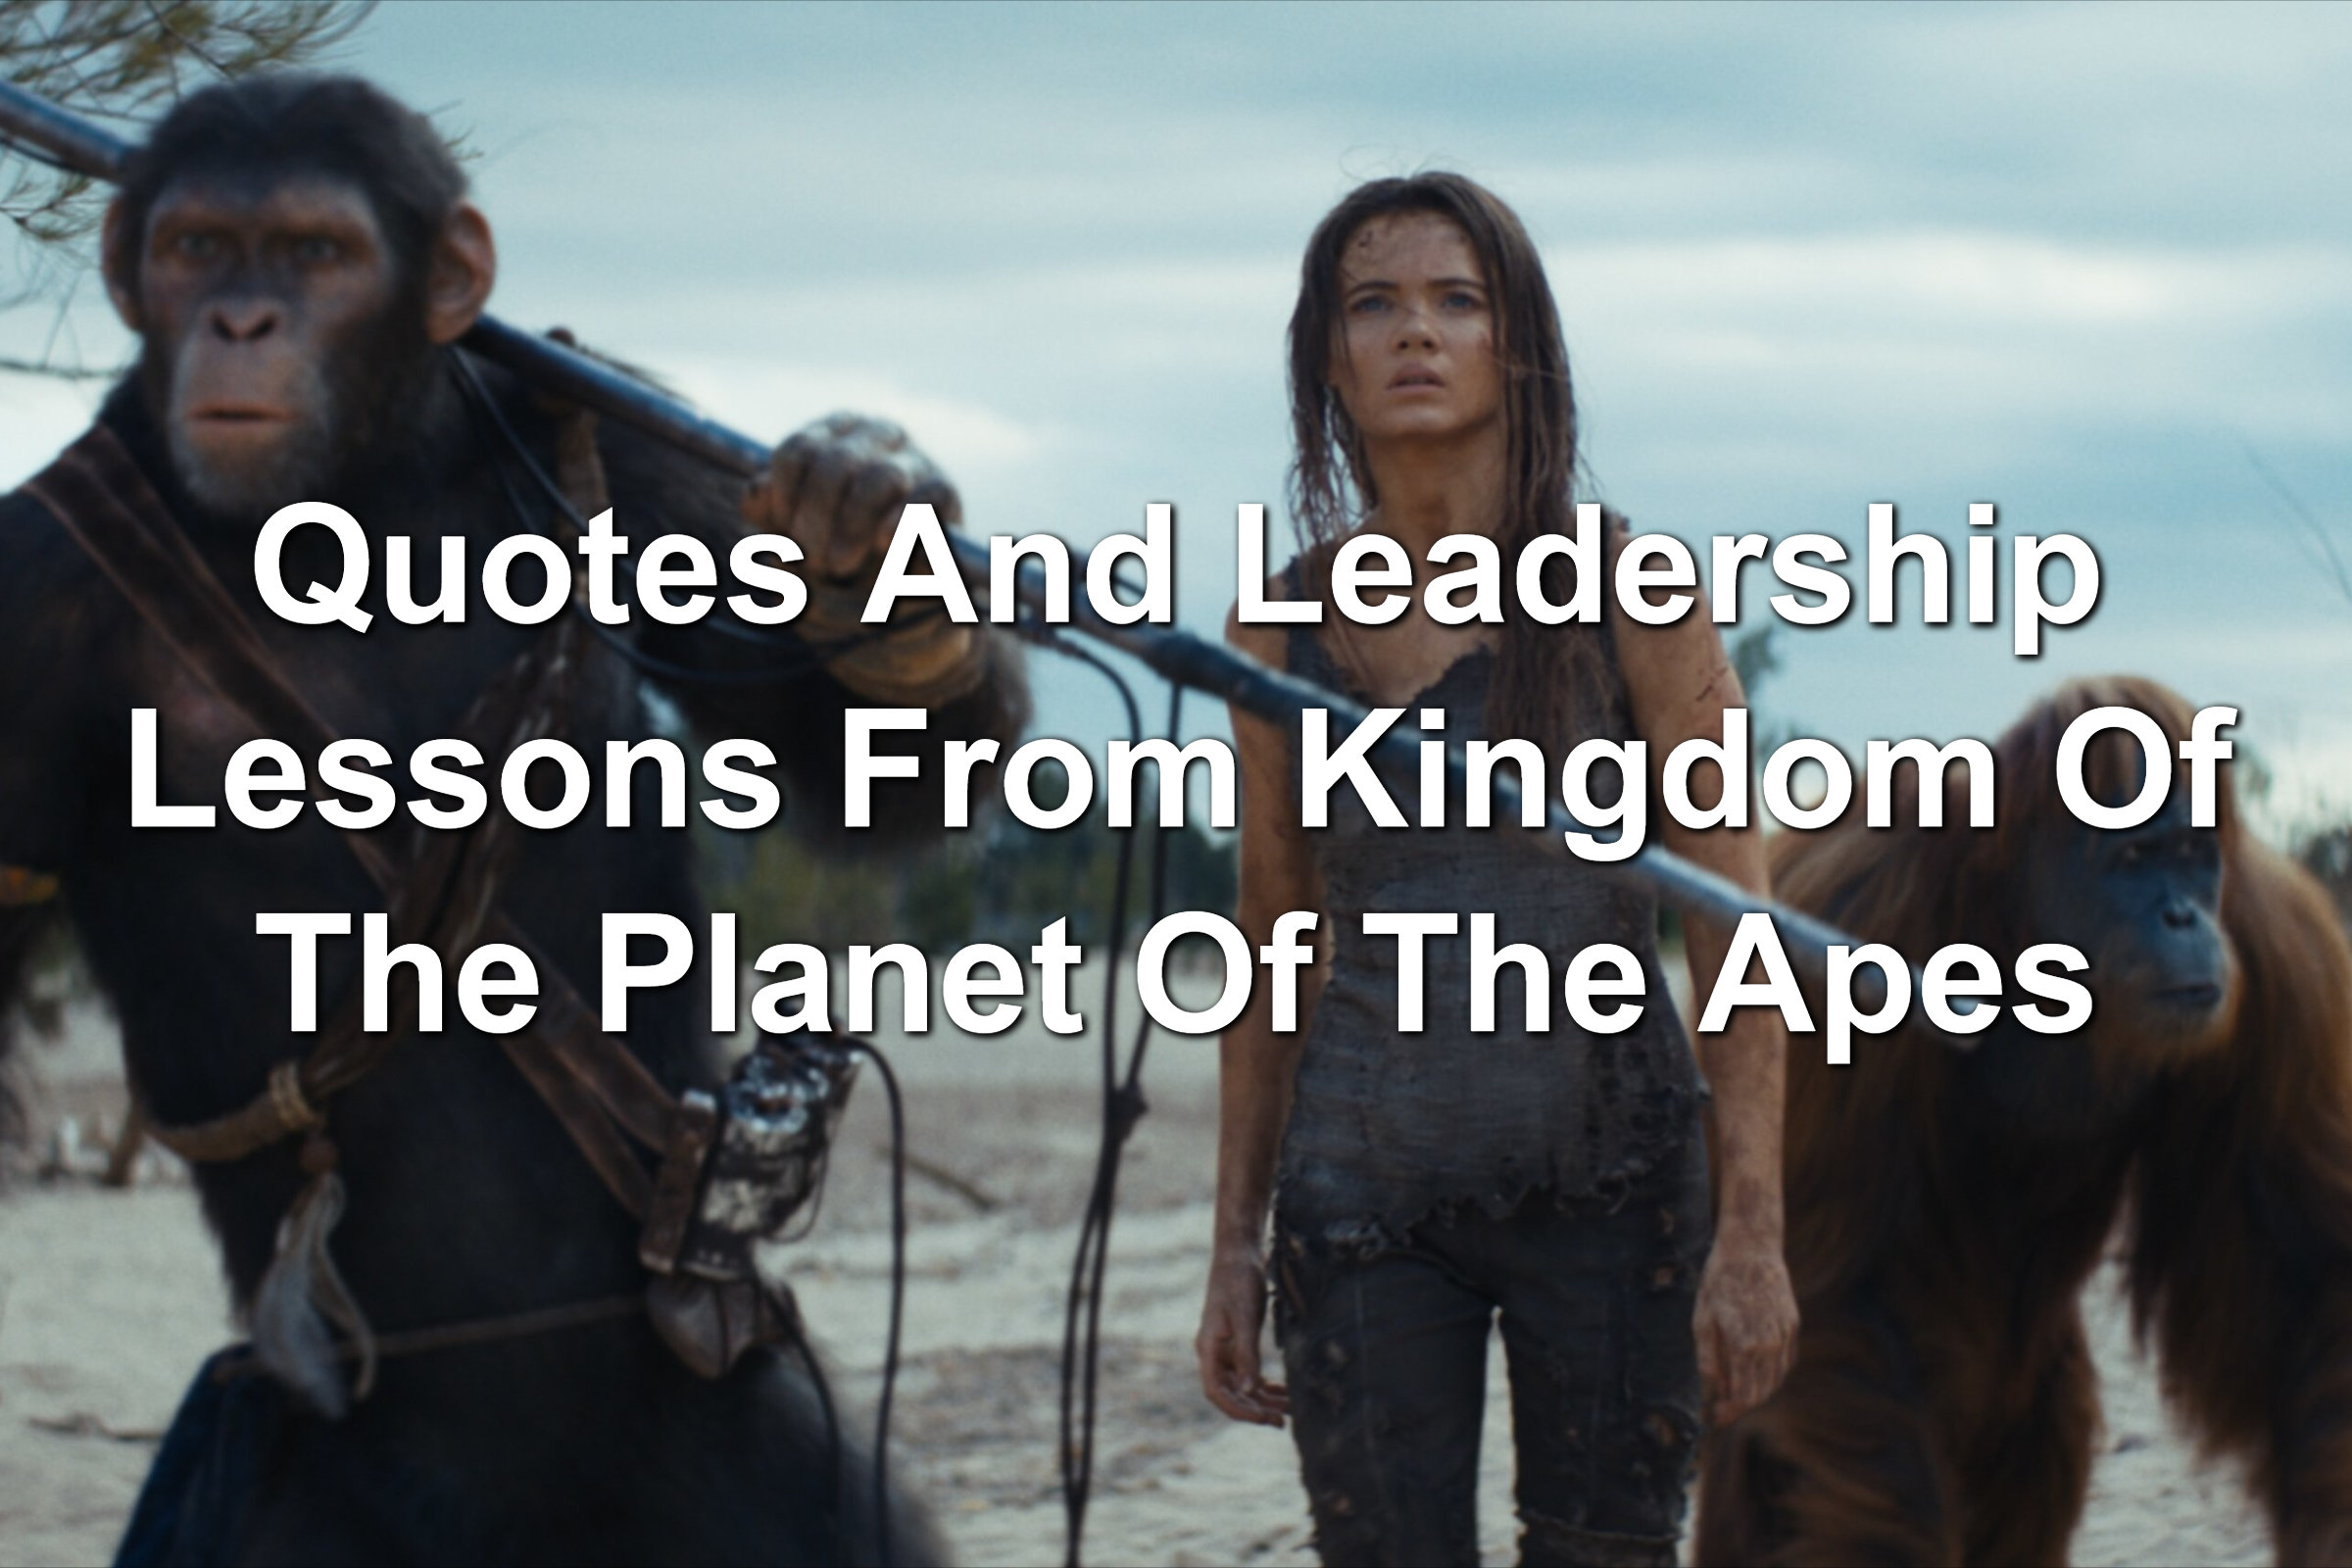 Scene from Kingdom Of The Planet Of The Apes.
Two apes are walking with a human woman. They are Noa and Raka and the woman is Mae.